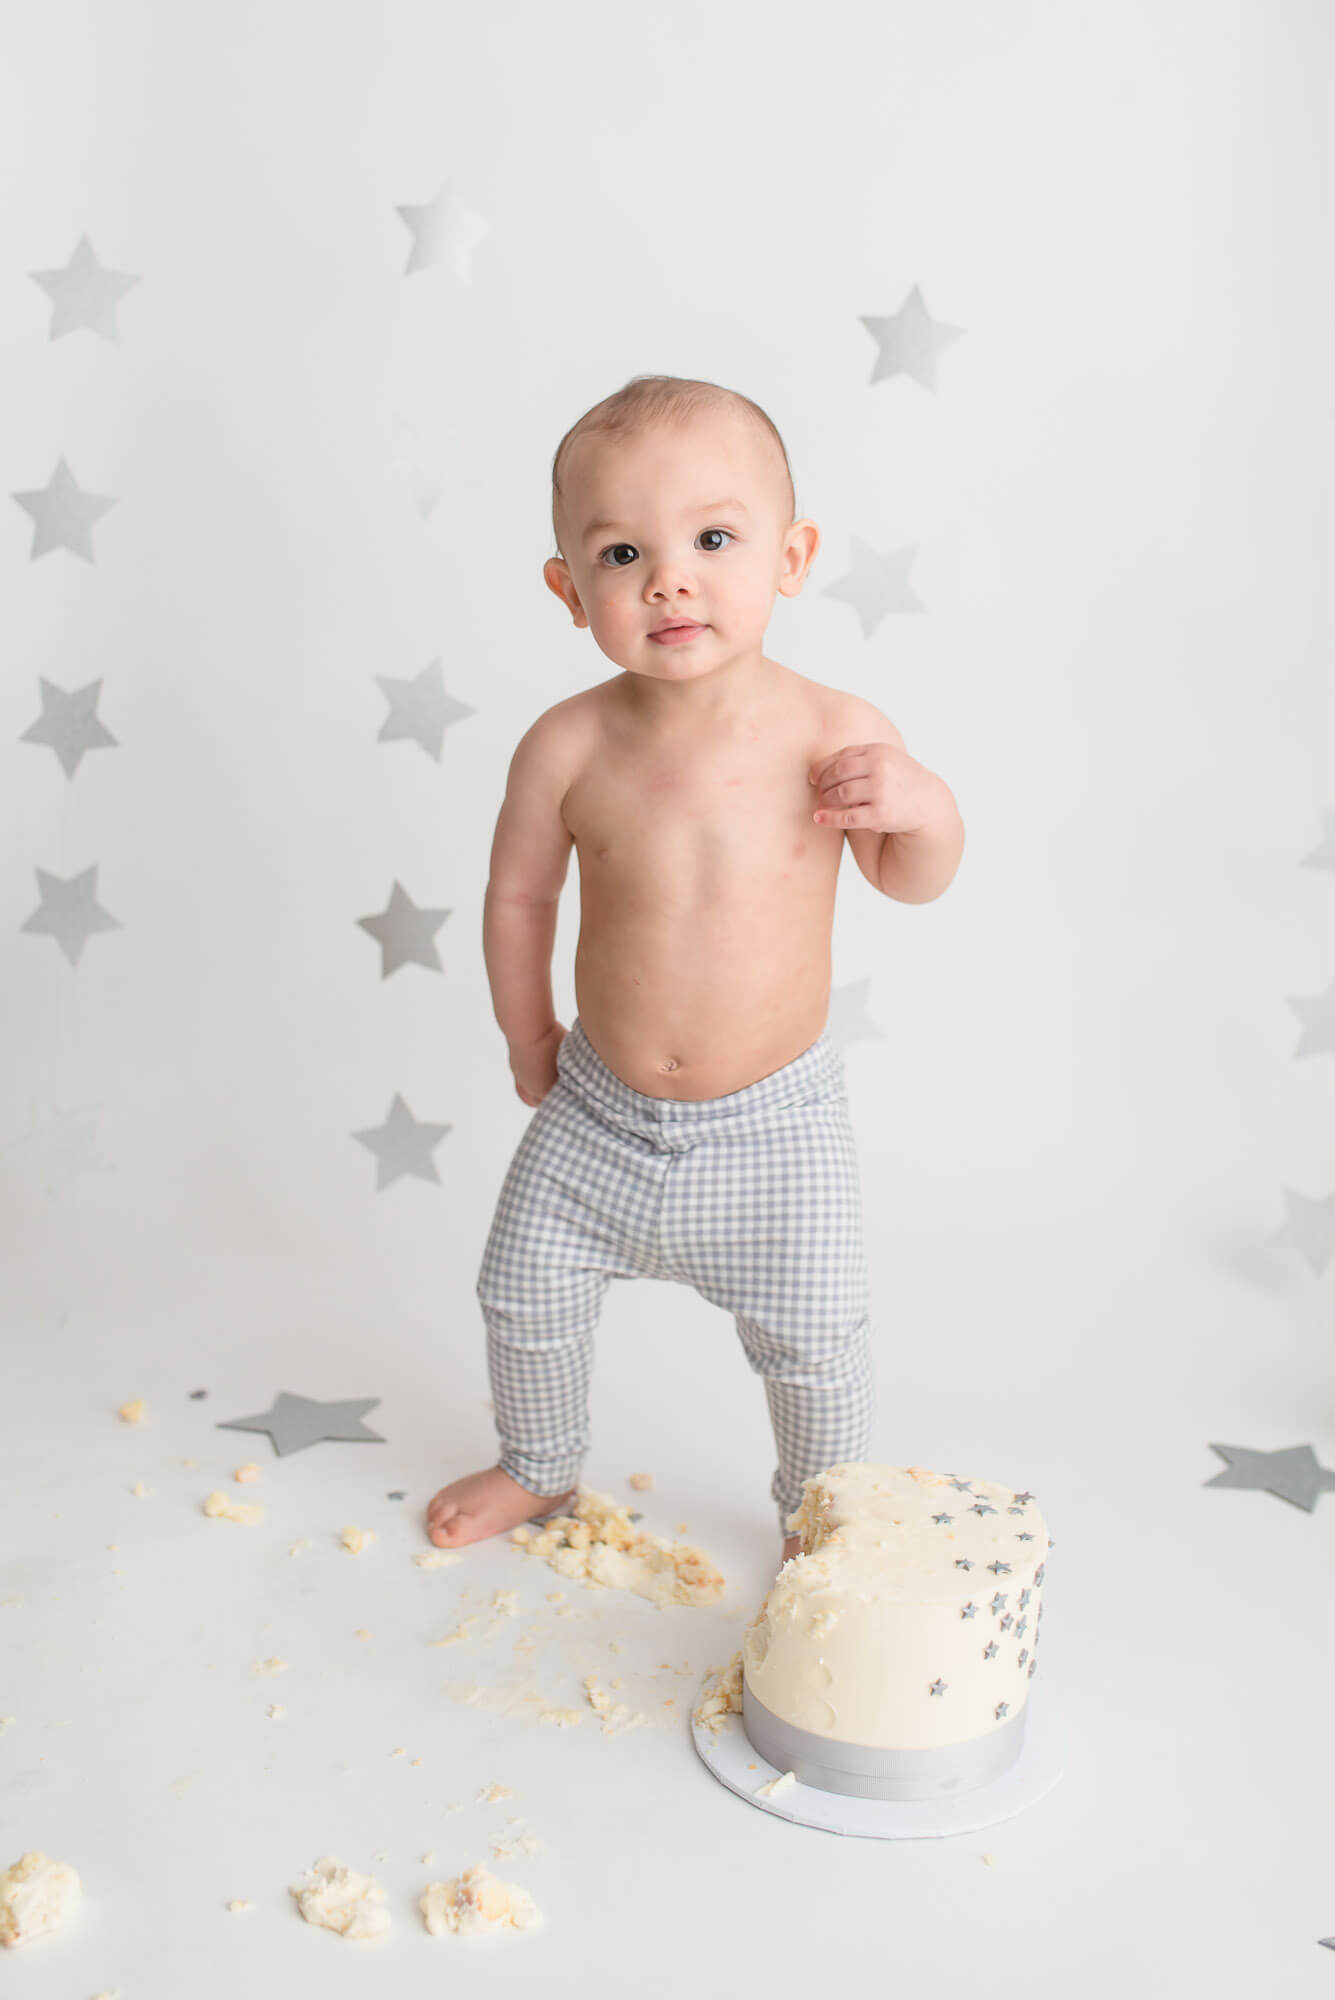 classic and modern cake smash session with boy and star cake and decor